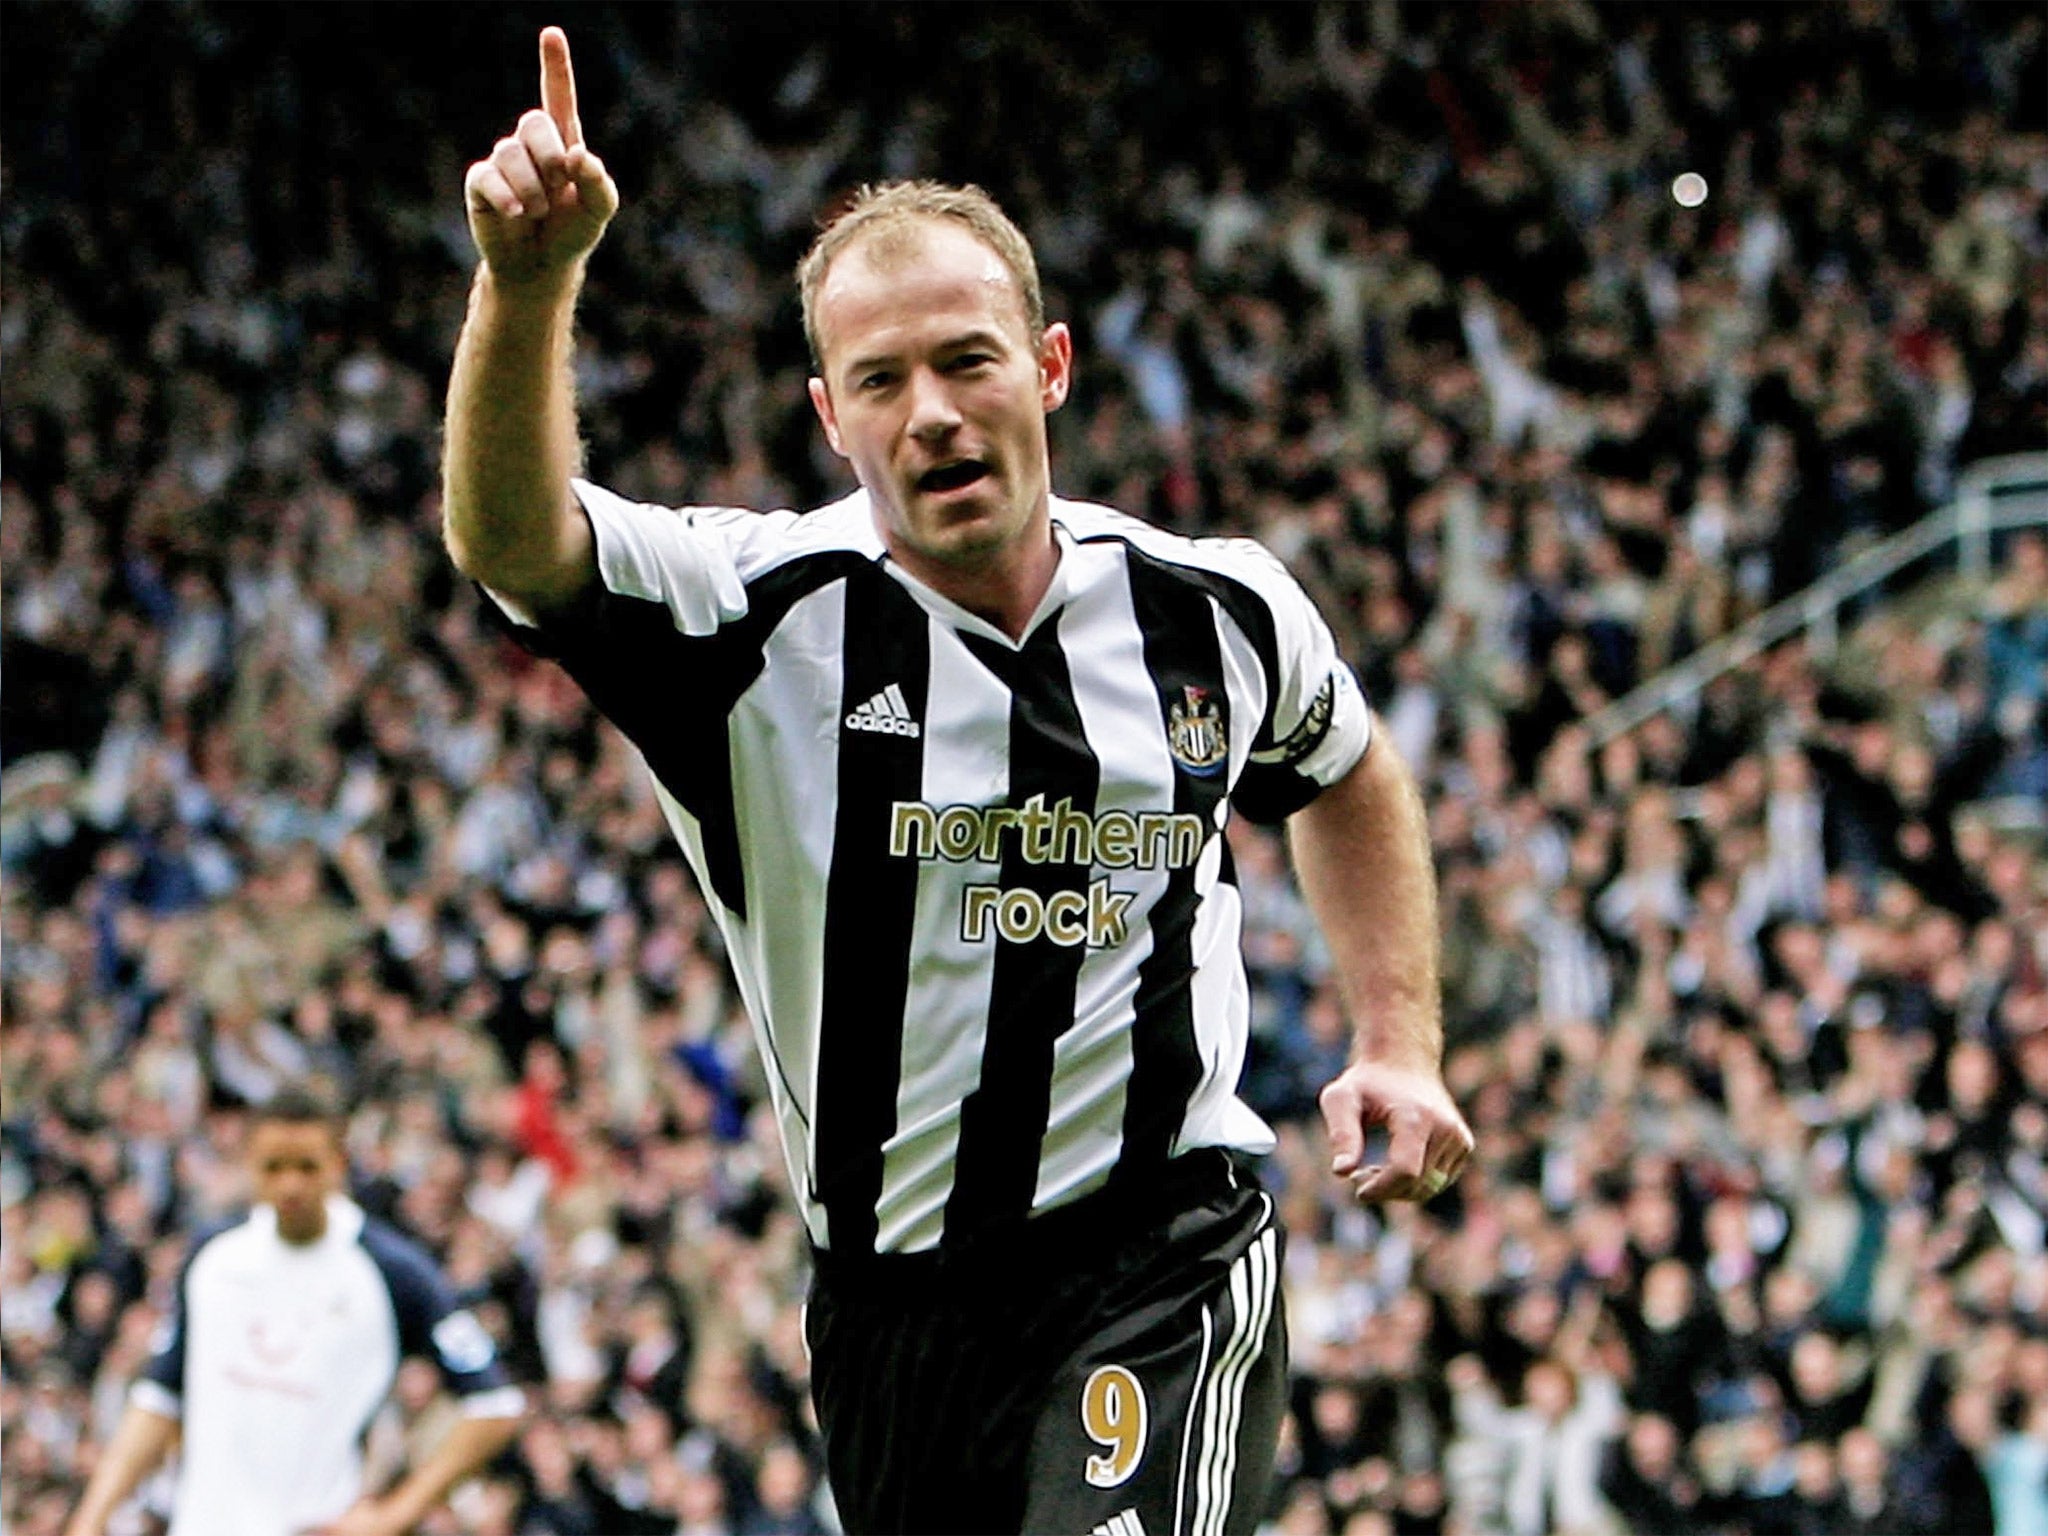 Shearer was at Wallsend before becoming a Newcastle great